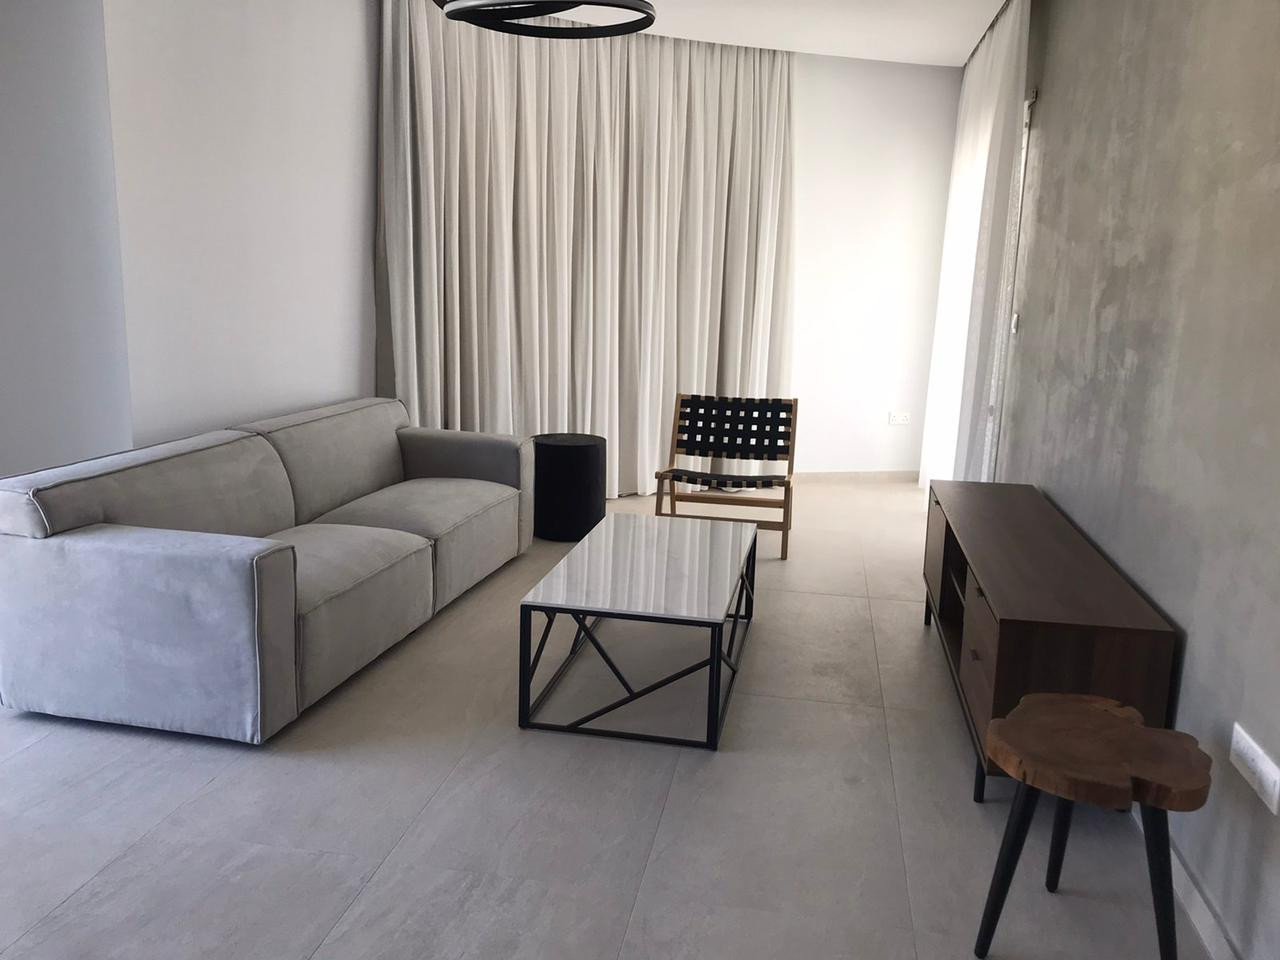 Property for Rent: Apartment (Penthouse) in Erimi, Limassol for Rent | Key Realtor Cyprus